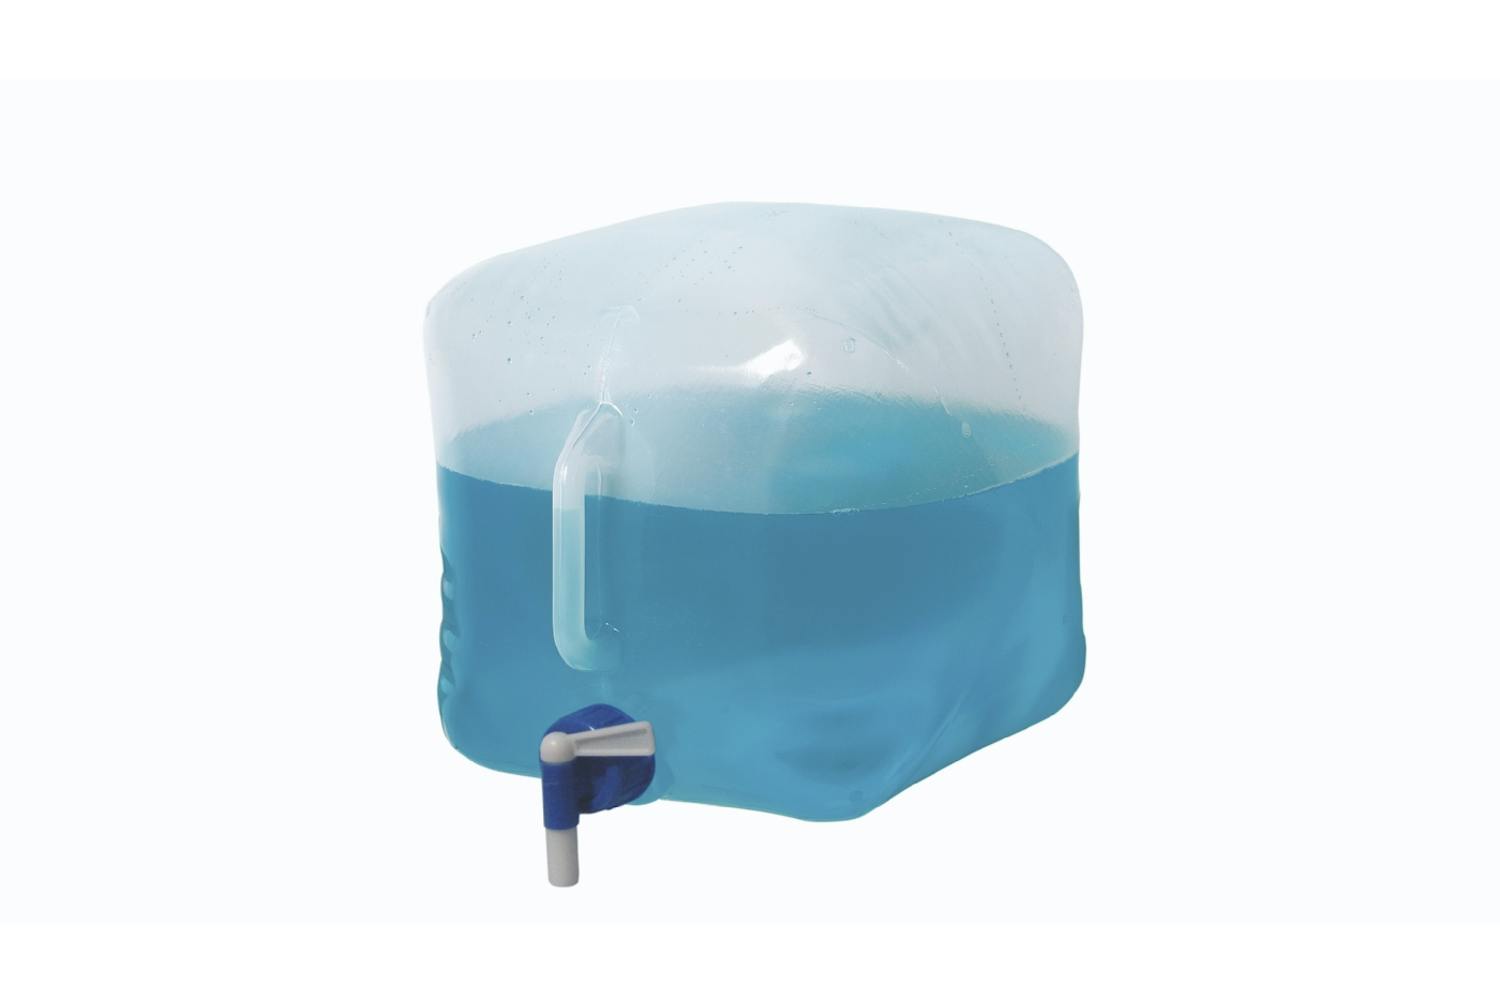 Outwell Water Carrier 15L